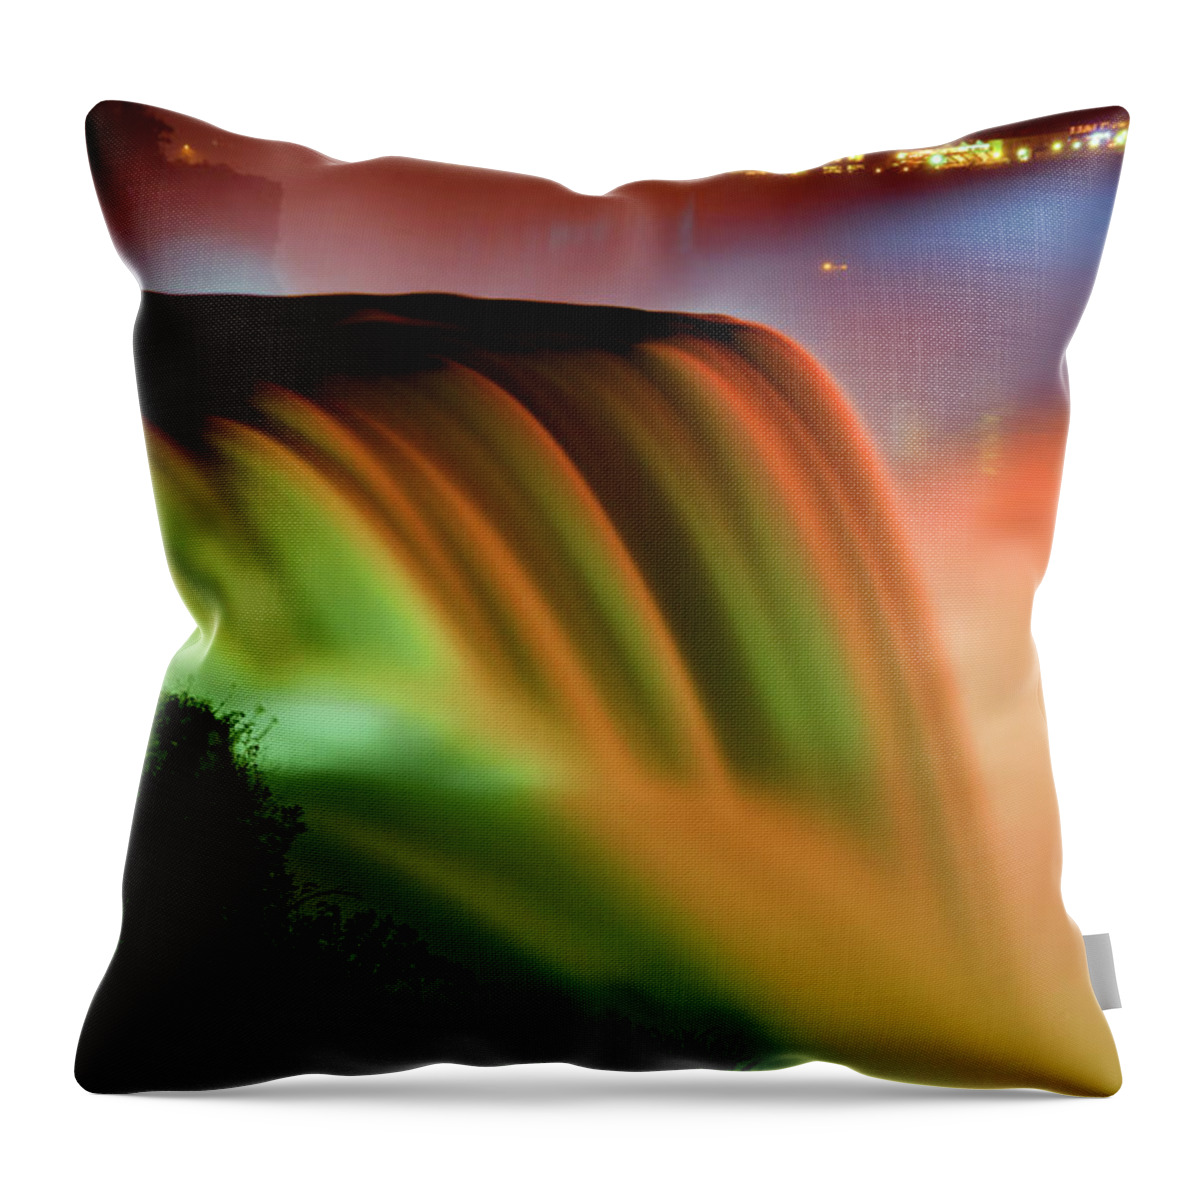 Niagara Falls; Night; Usa; Colorful; Light; Illumination; Lights; Evening; Festival; New York; Celebration; Beautiful; Scenic; View; New York State; Ny; American Falls; Niagara Falls State Park; Niagara Falls City; Landscape; Nature; Waterfall; Outdoor; Outdoors; America Throw Pillow featuring the photograph Niagara Falls Illumination of Lights At Night by Charline Xia